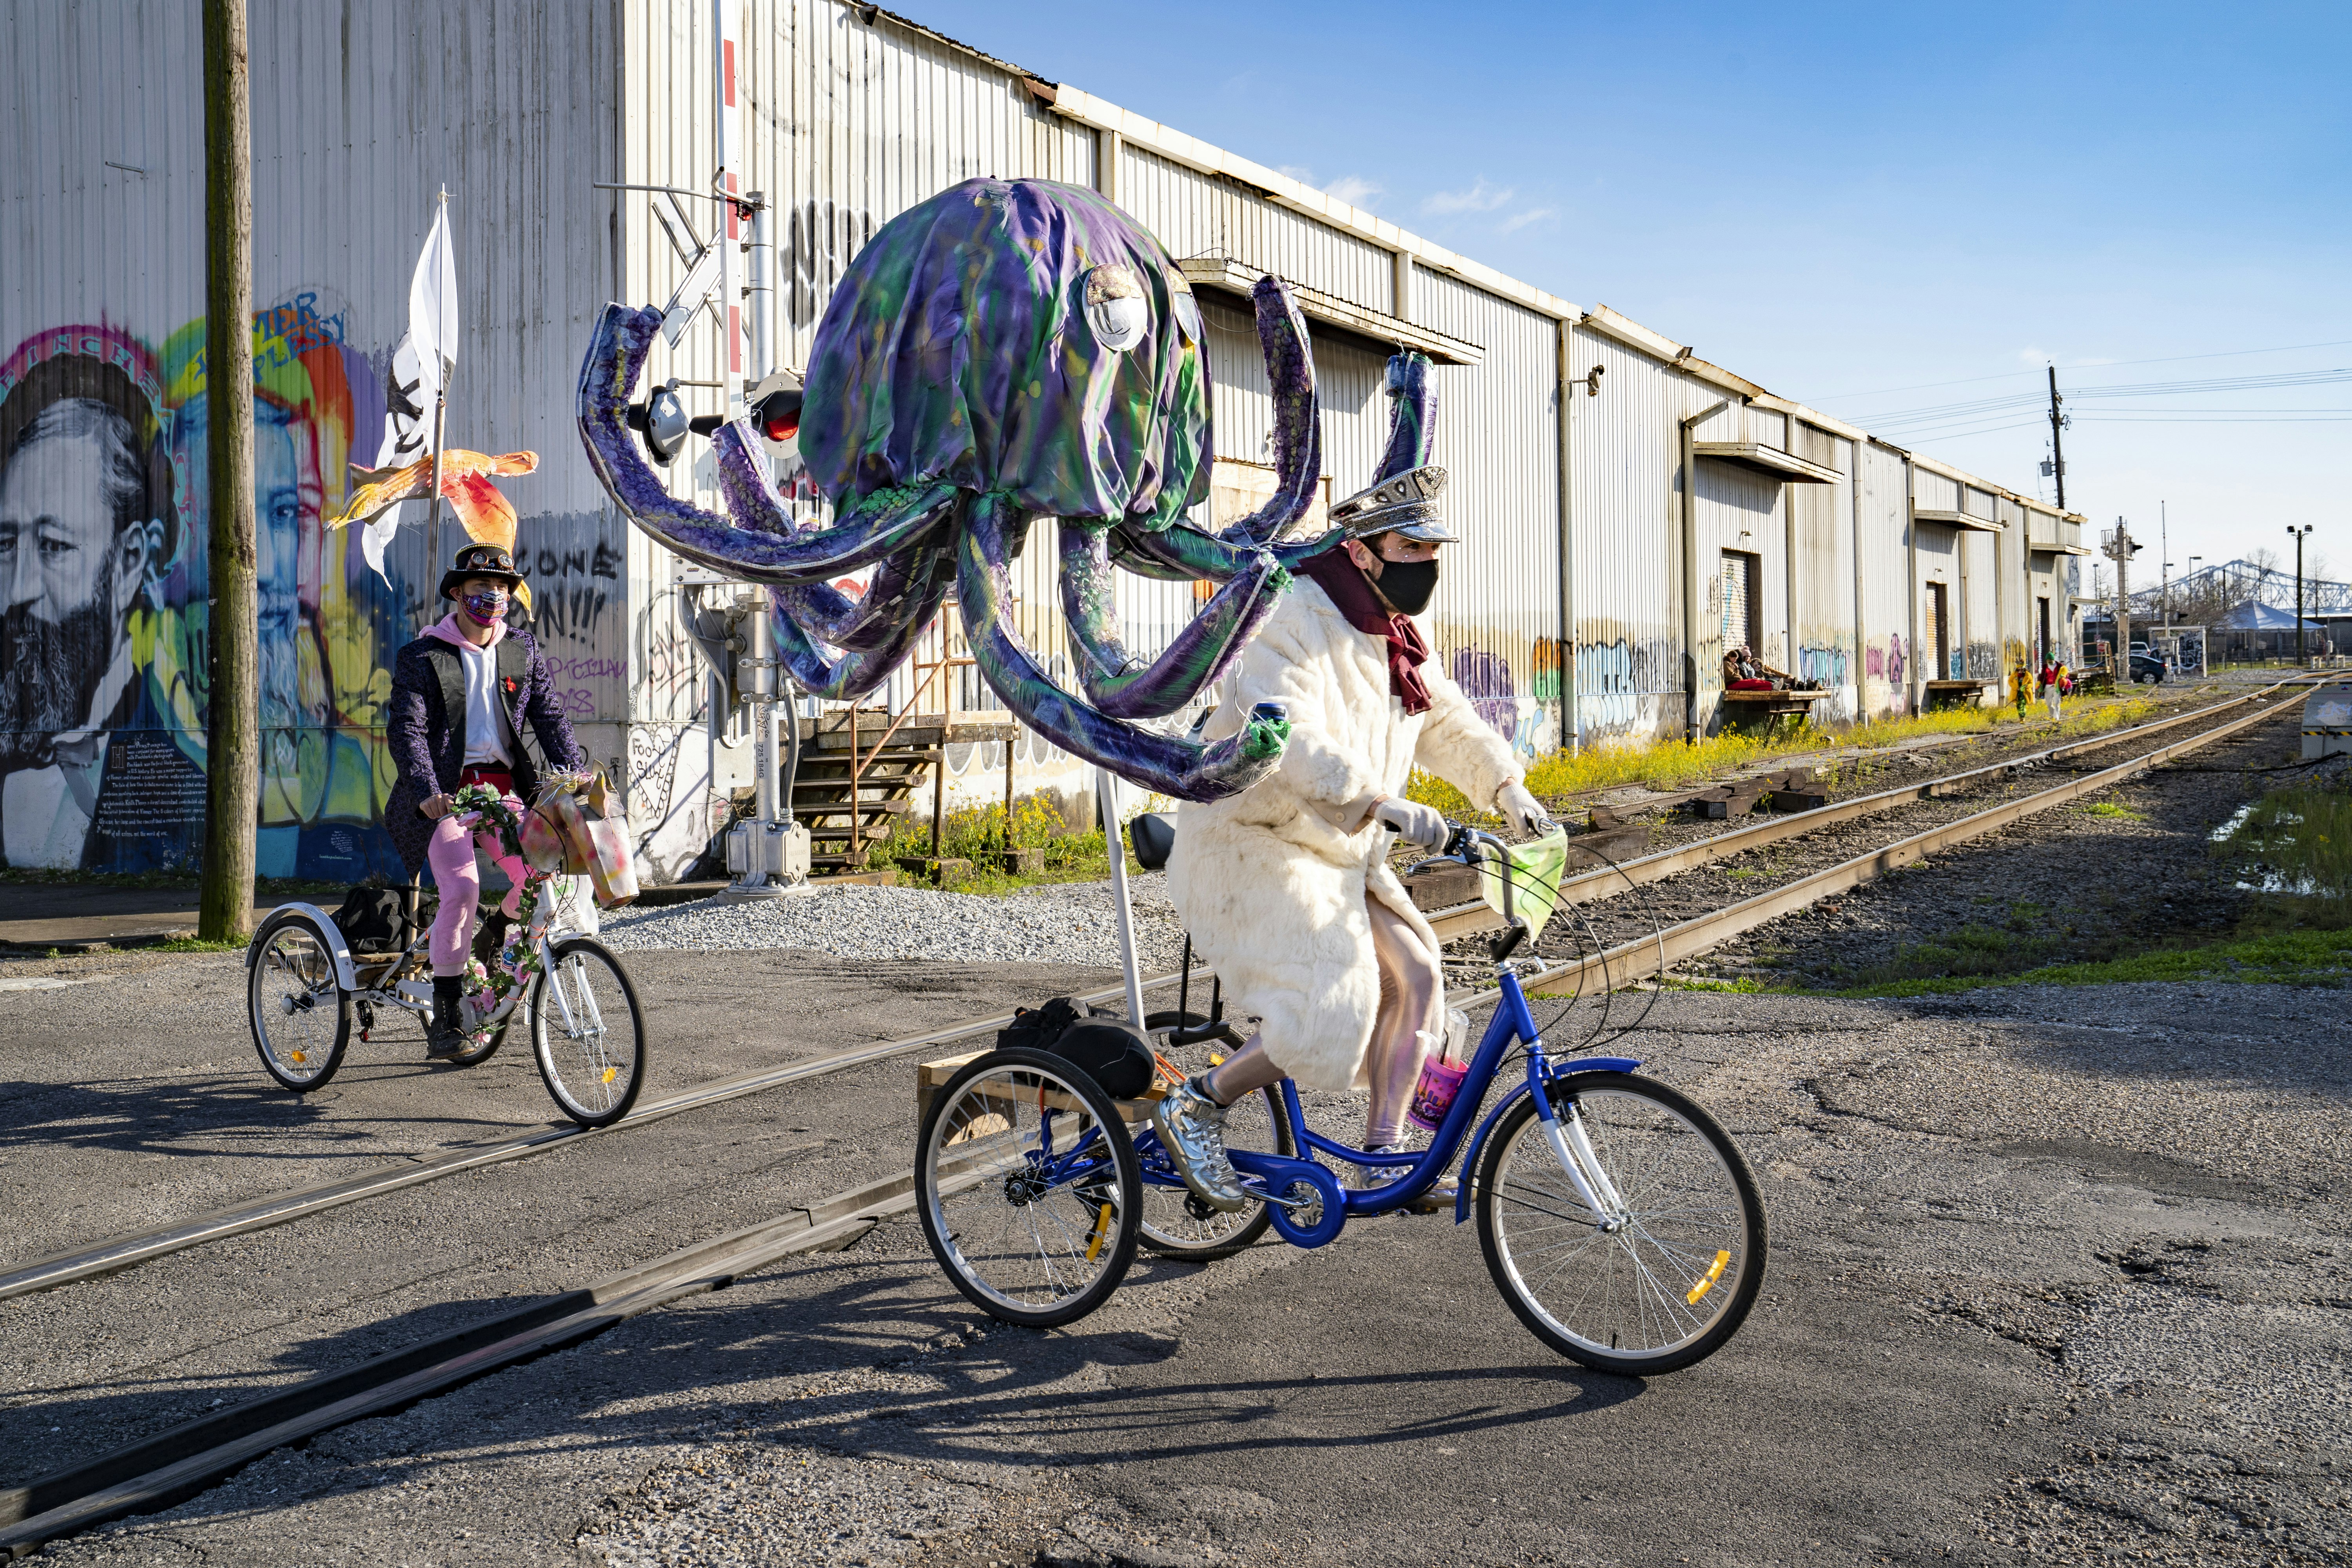 Costumed Mardi Gras revelers ride bikes through the Bywater in front of street art. 